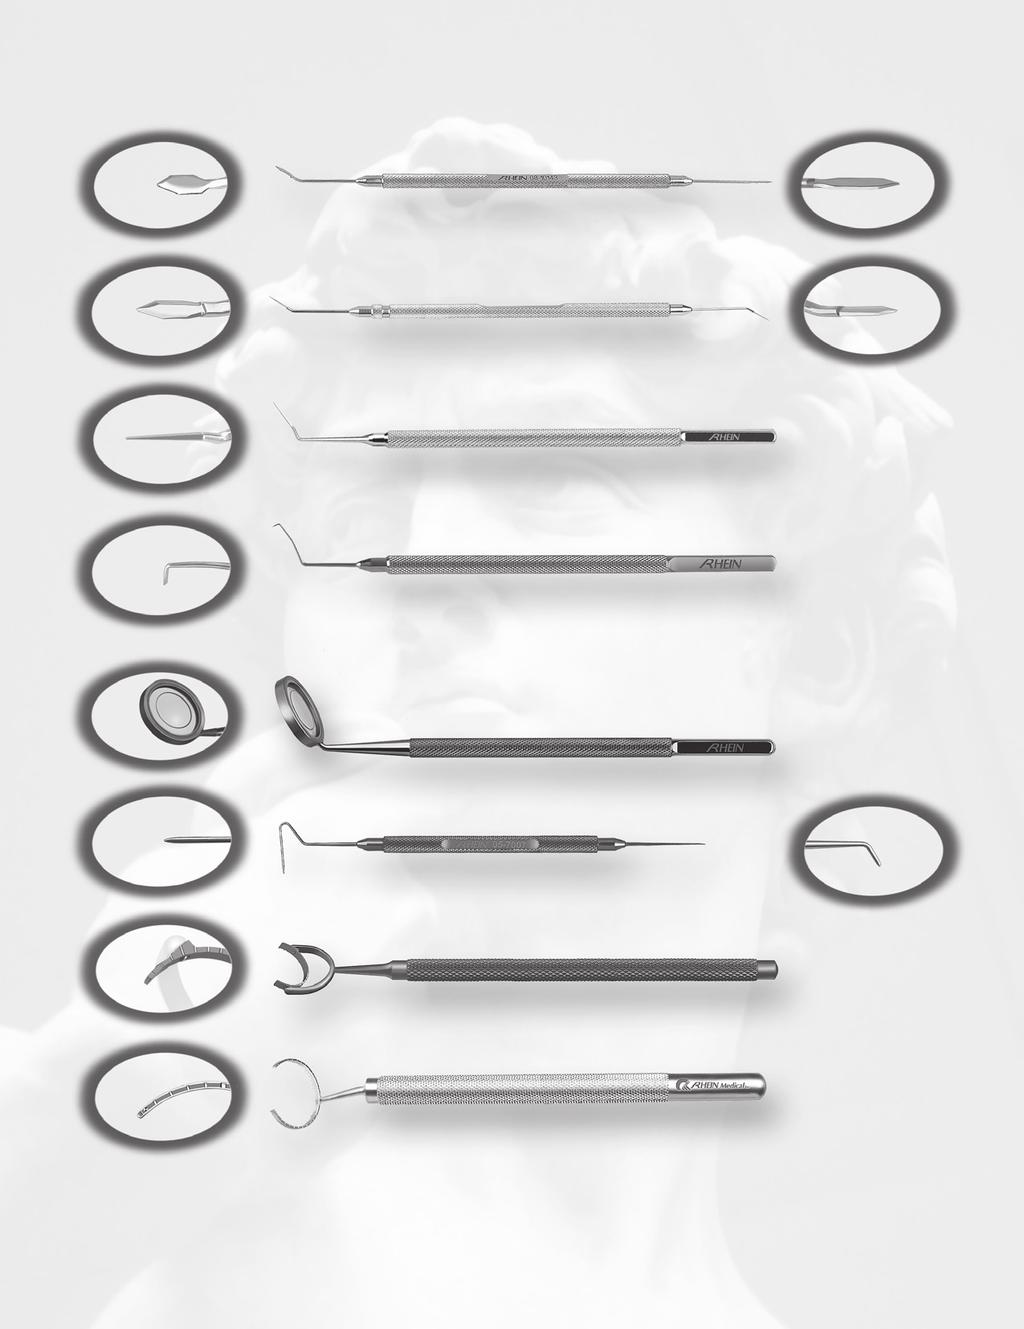 Choppers- Fixation 08-10143: Femtosecond Double-Ended Incision Dissector, 1mm & 2mm, Stainless 08-10144: Folden Femto Double-Ended Dissector, 0.7mm & 1.